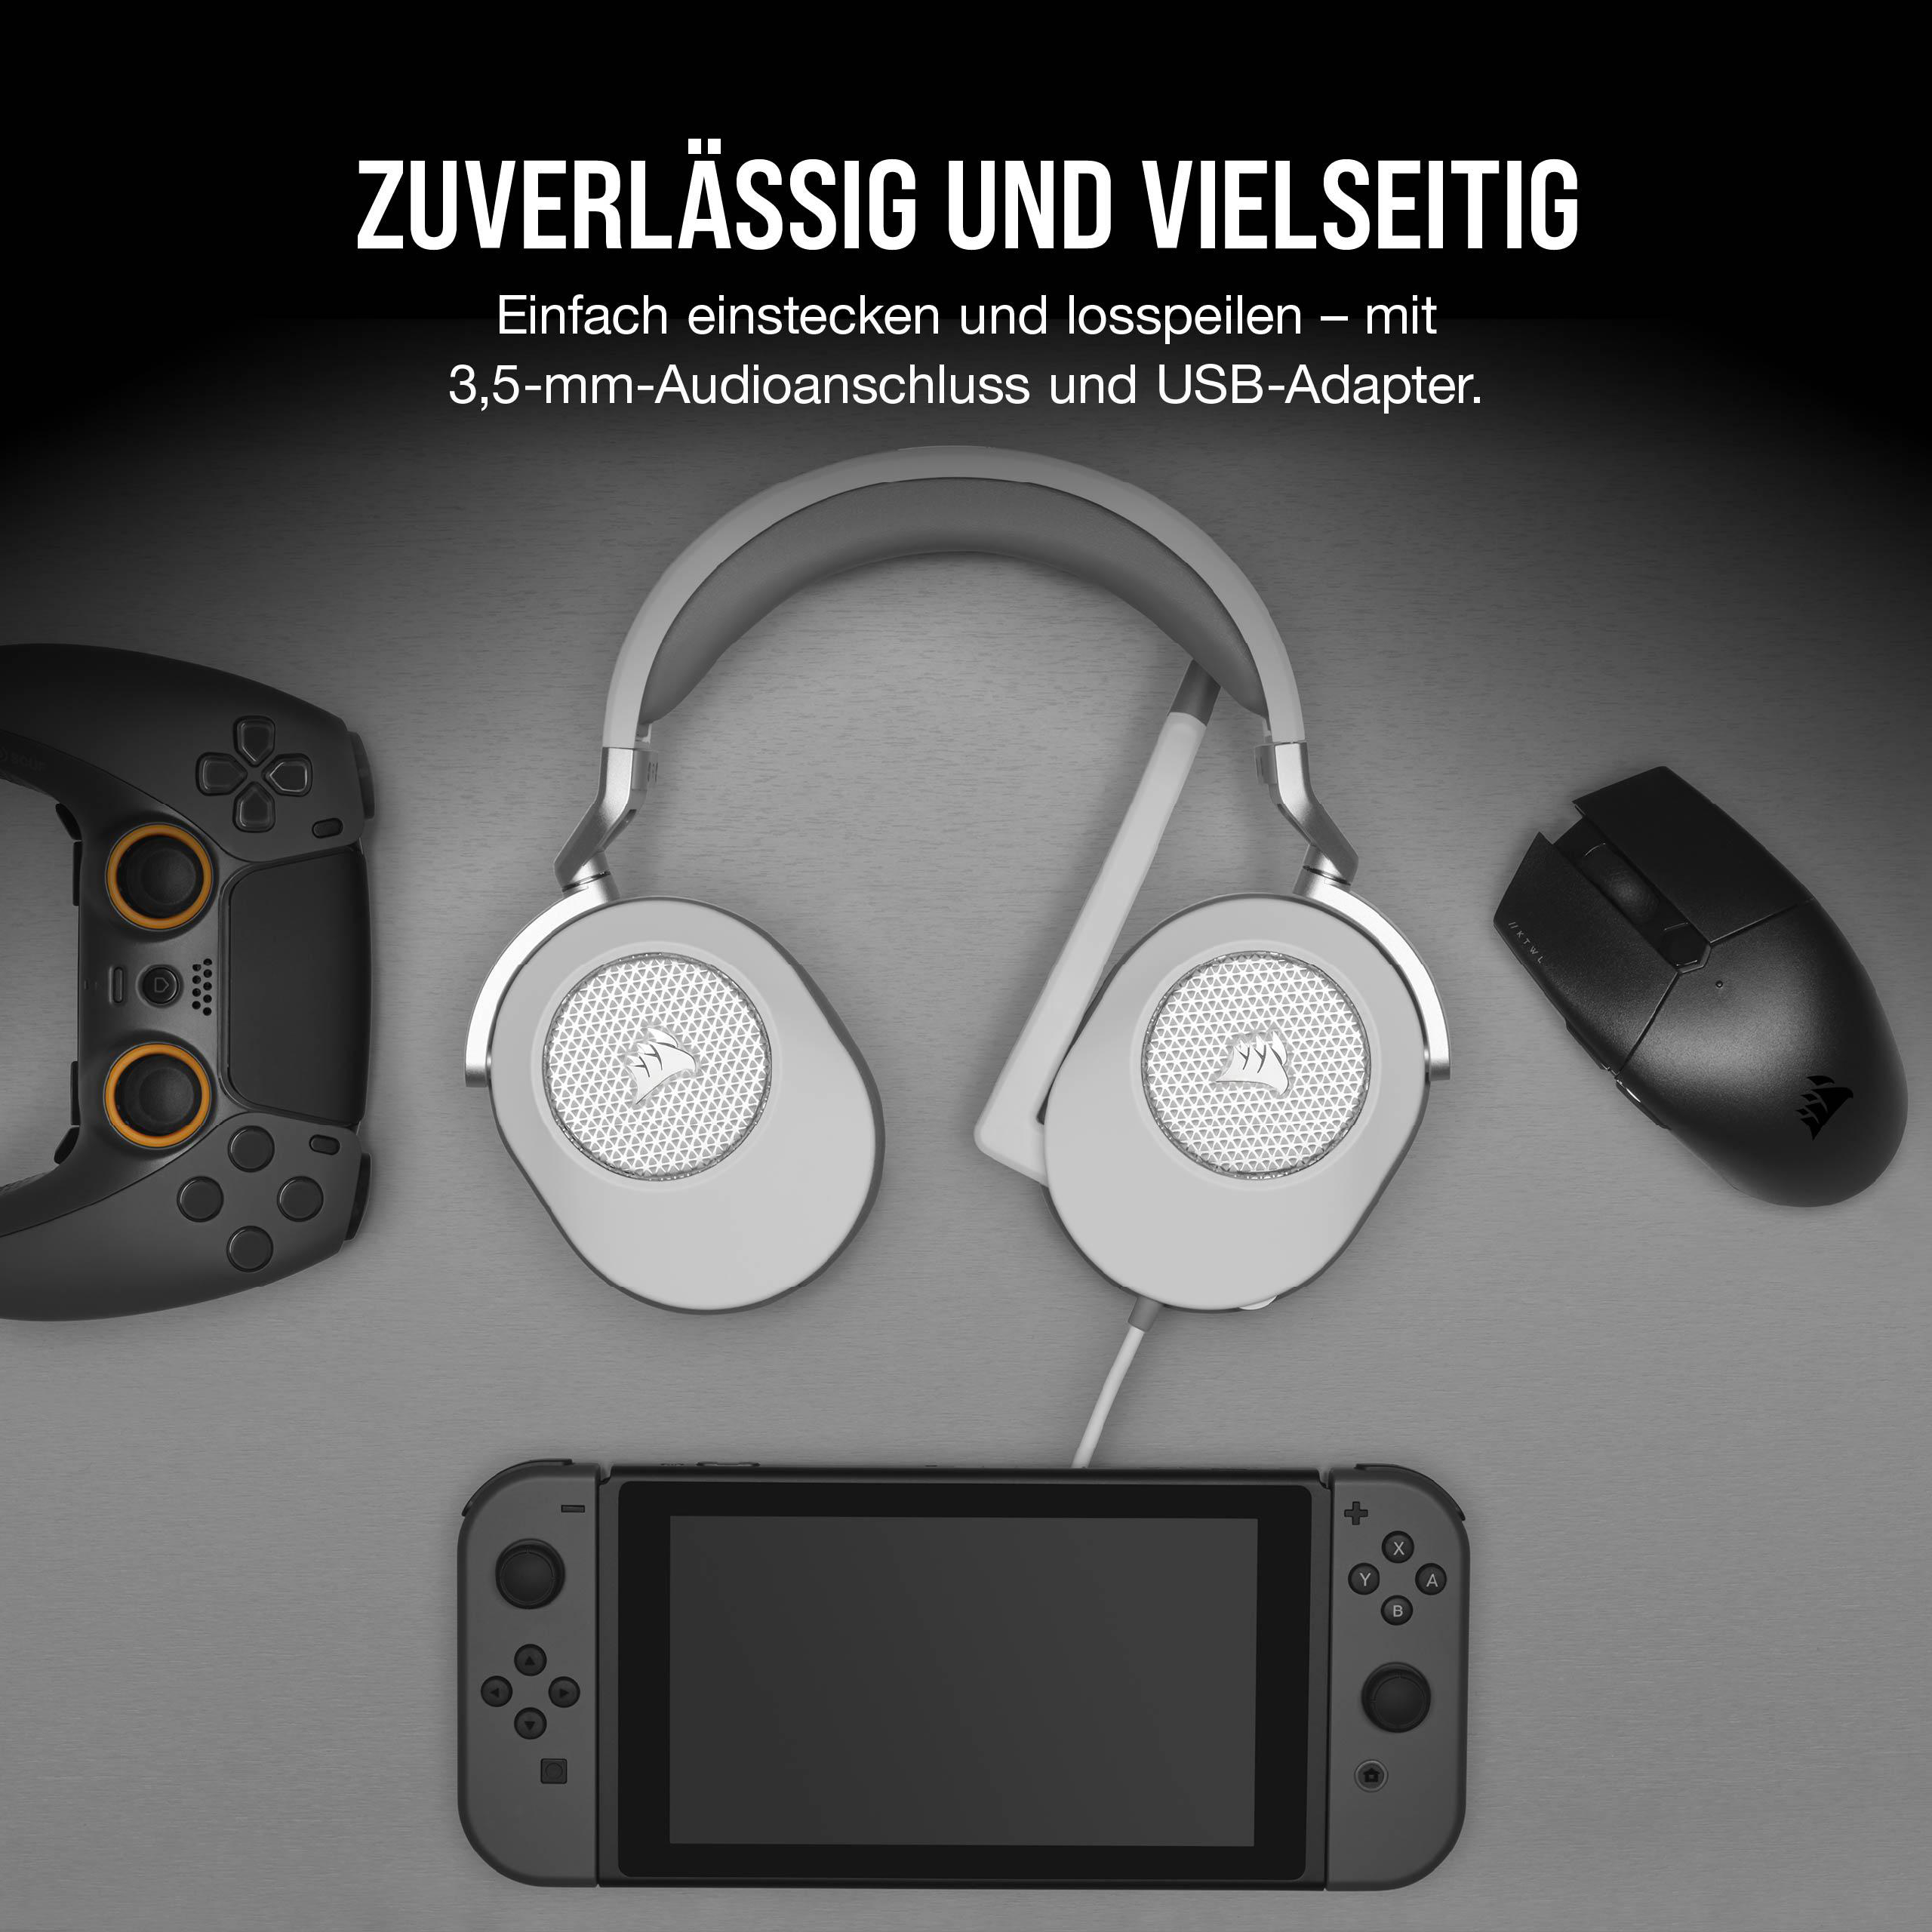 Over-ear Weiß HS65 CORSAIR Surround, Gaming Headset